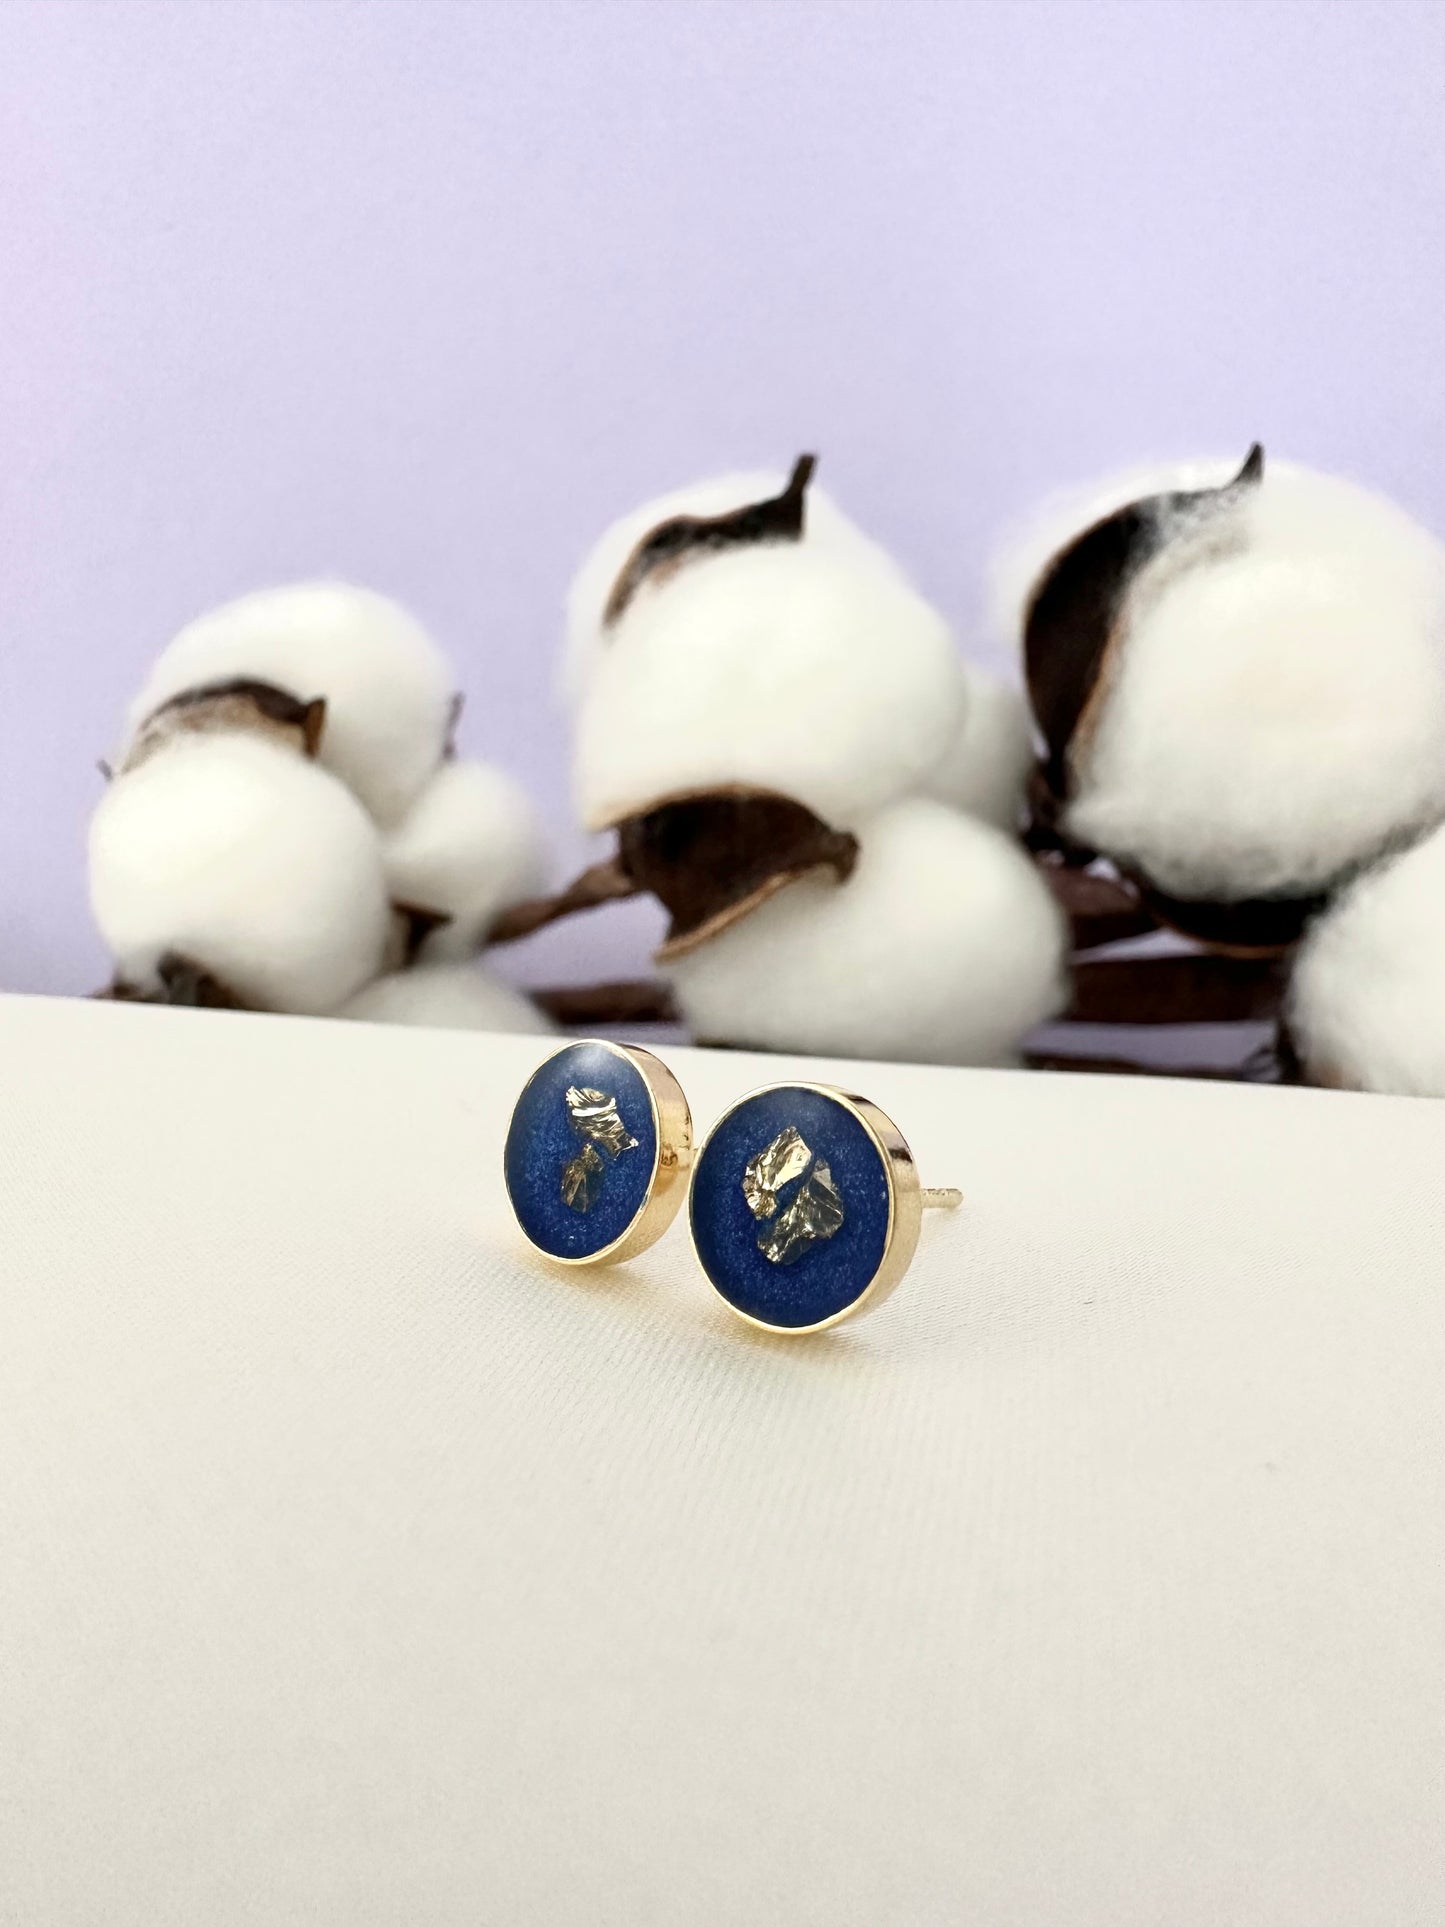 Blue earrings with golden stones